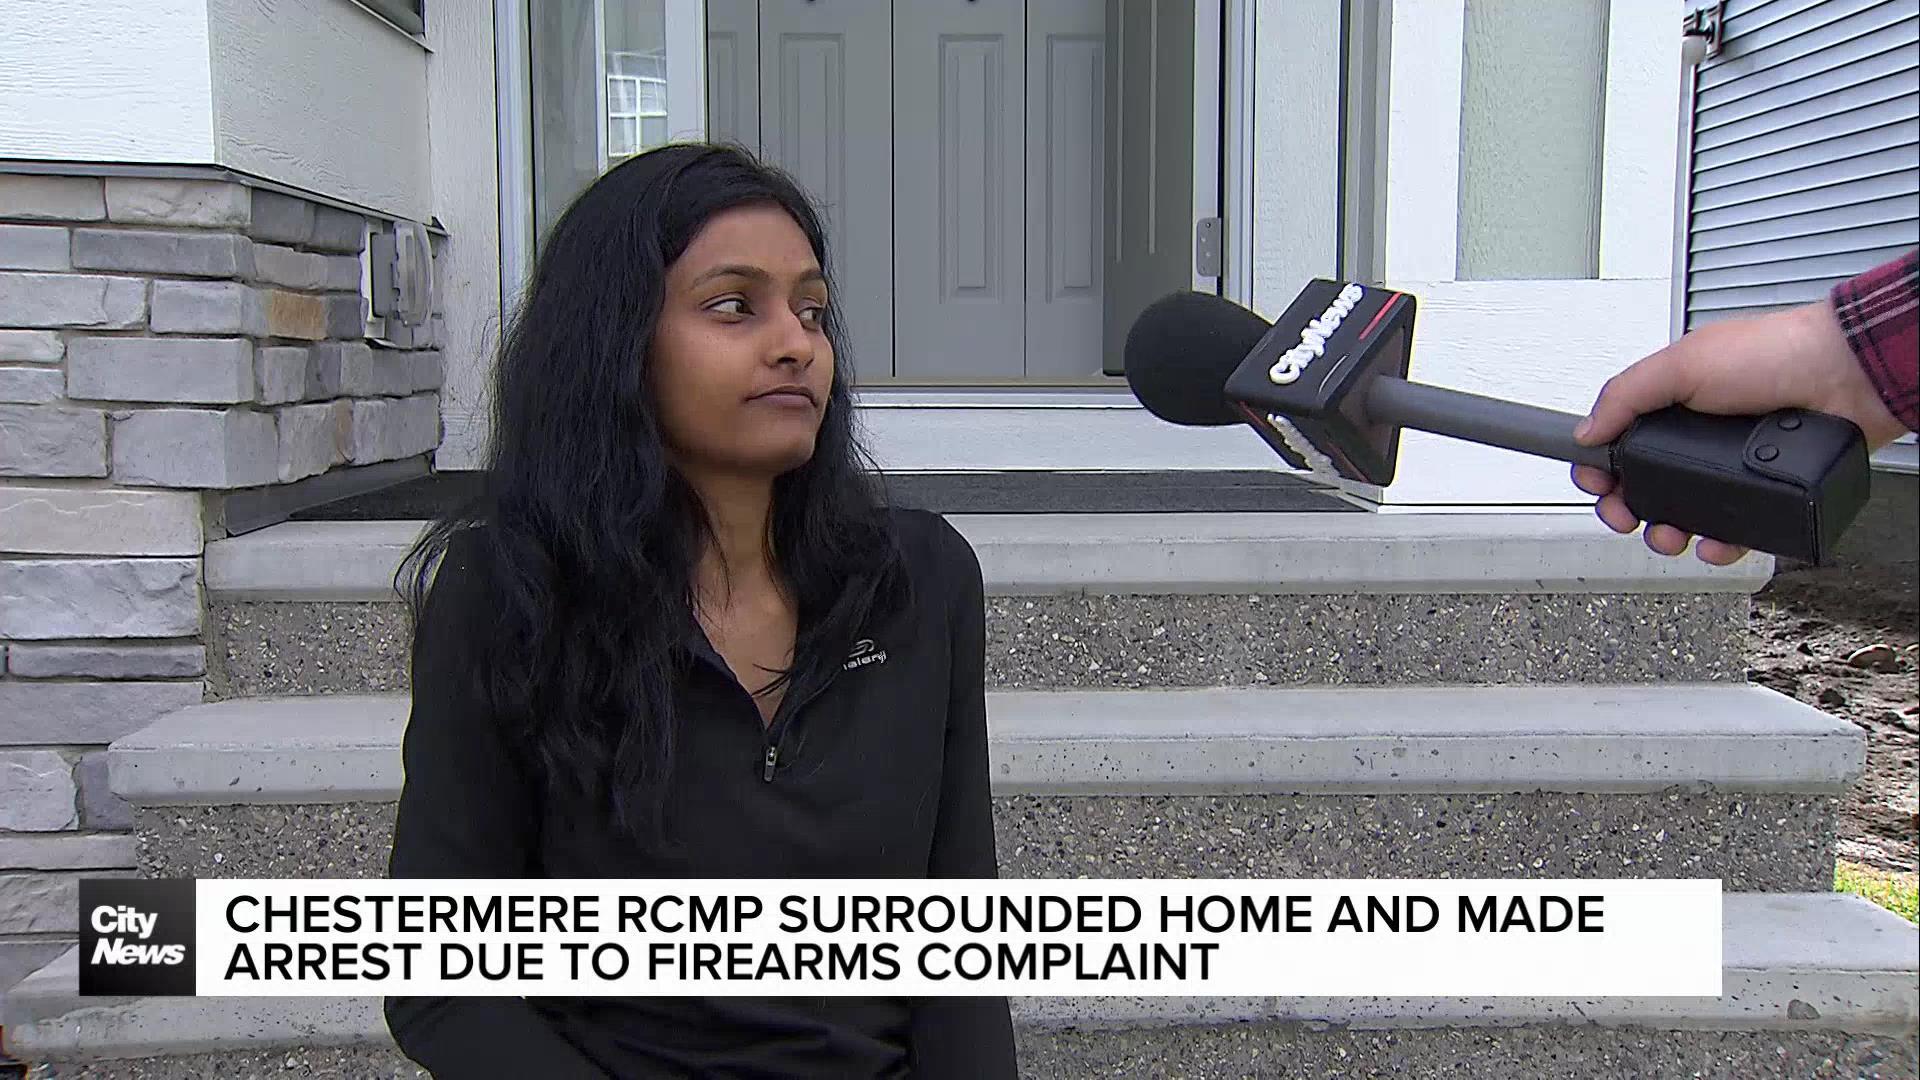 Chestermere RCMP surrounded home and made arrest due to firearms complaint